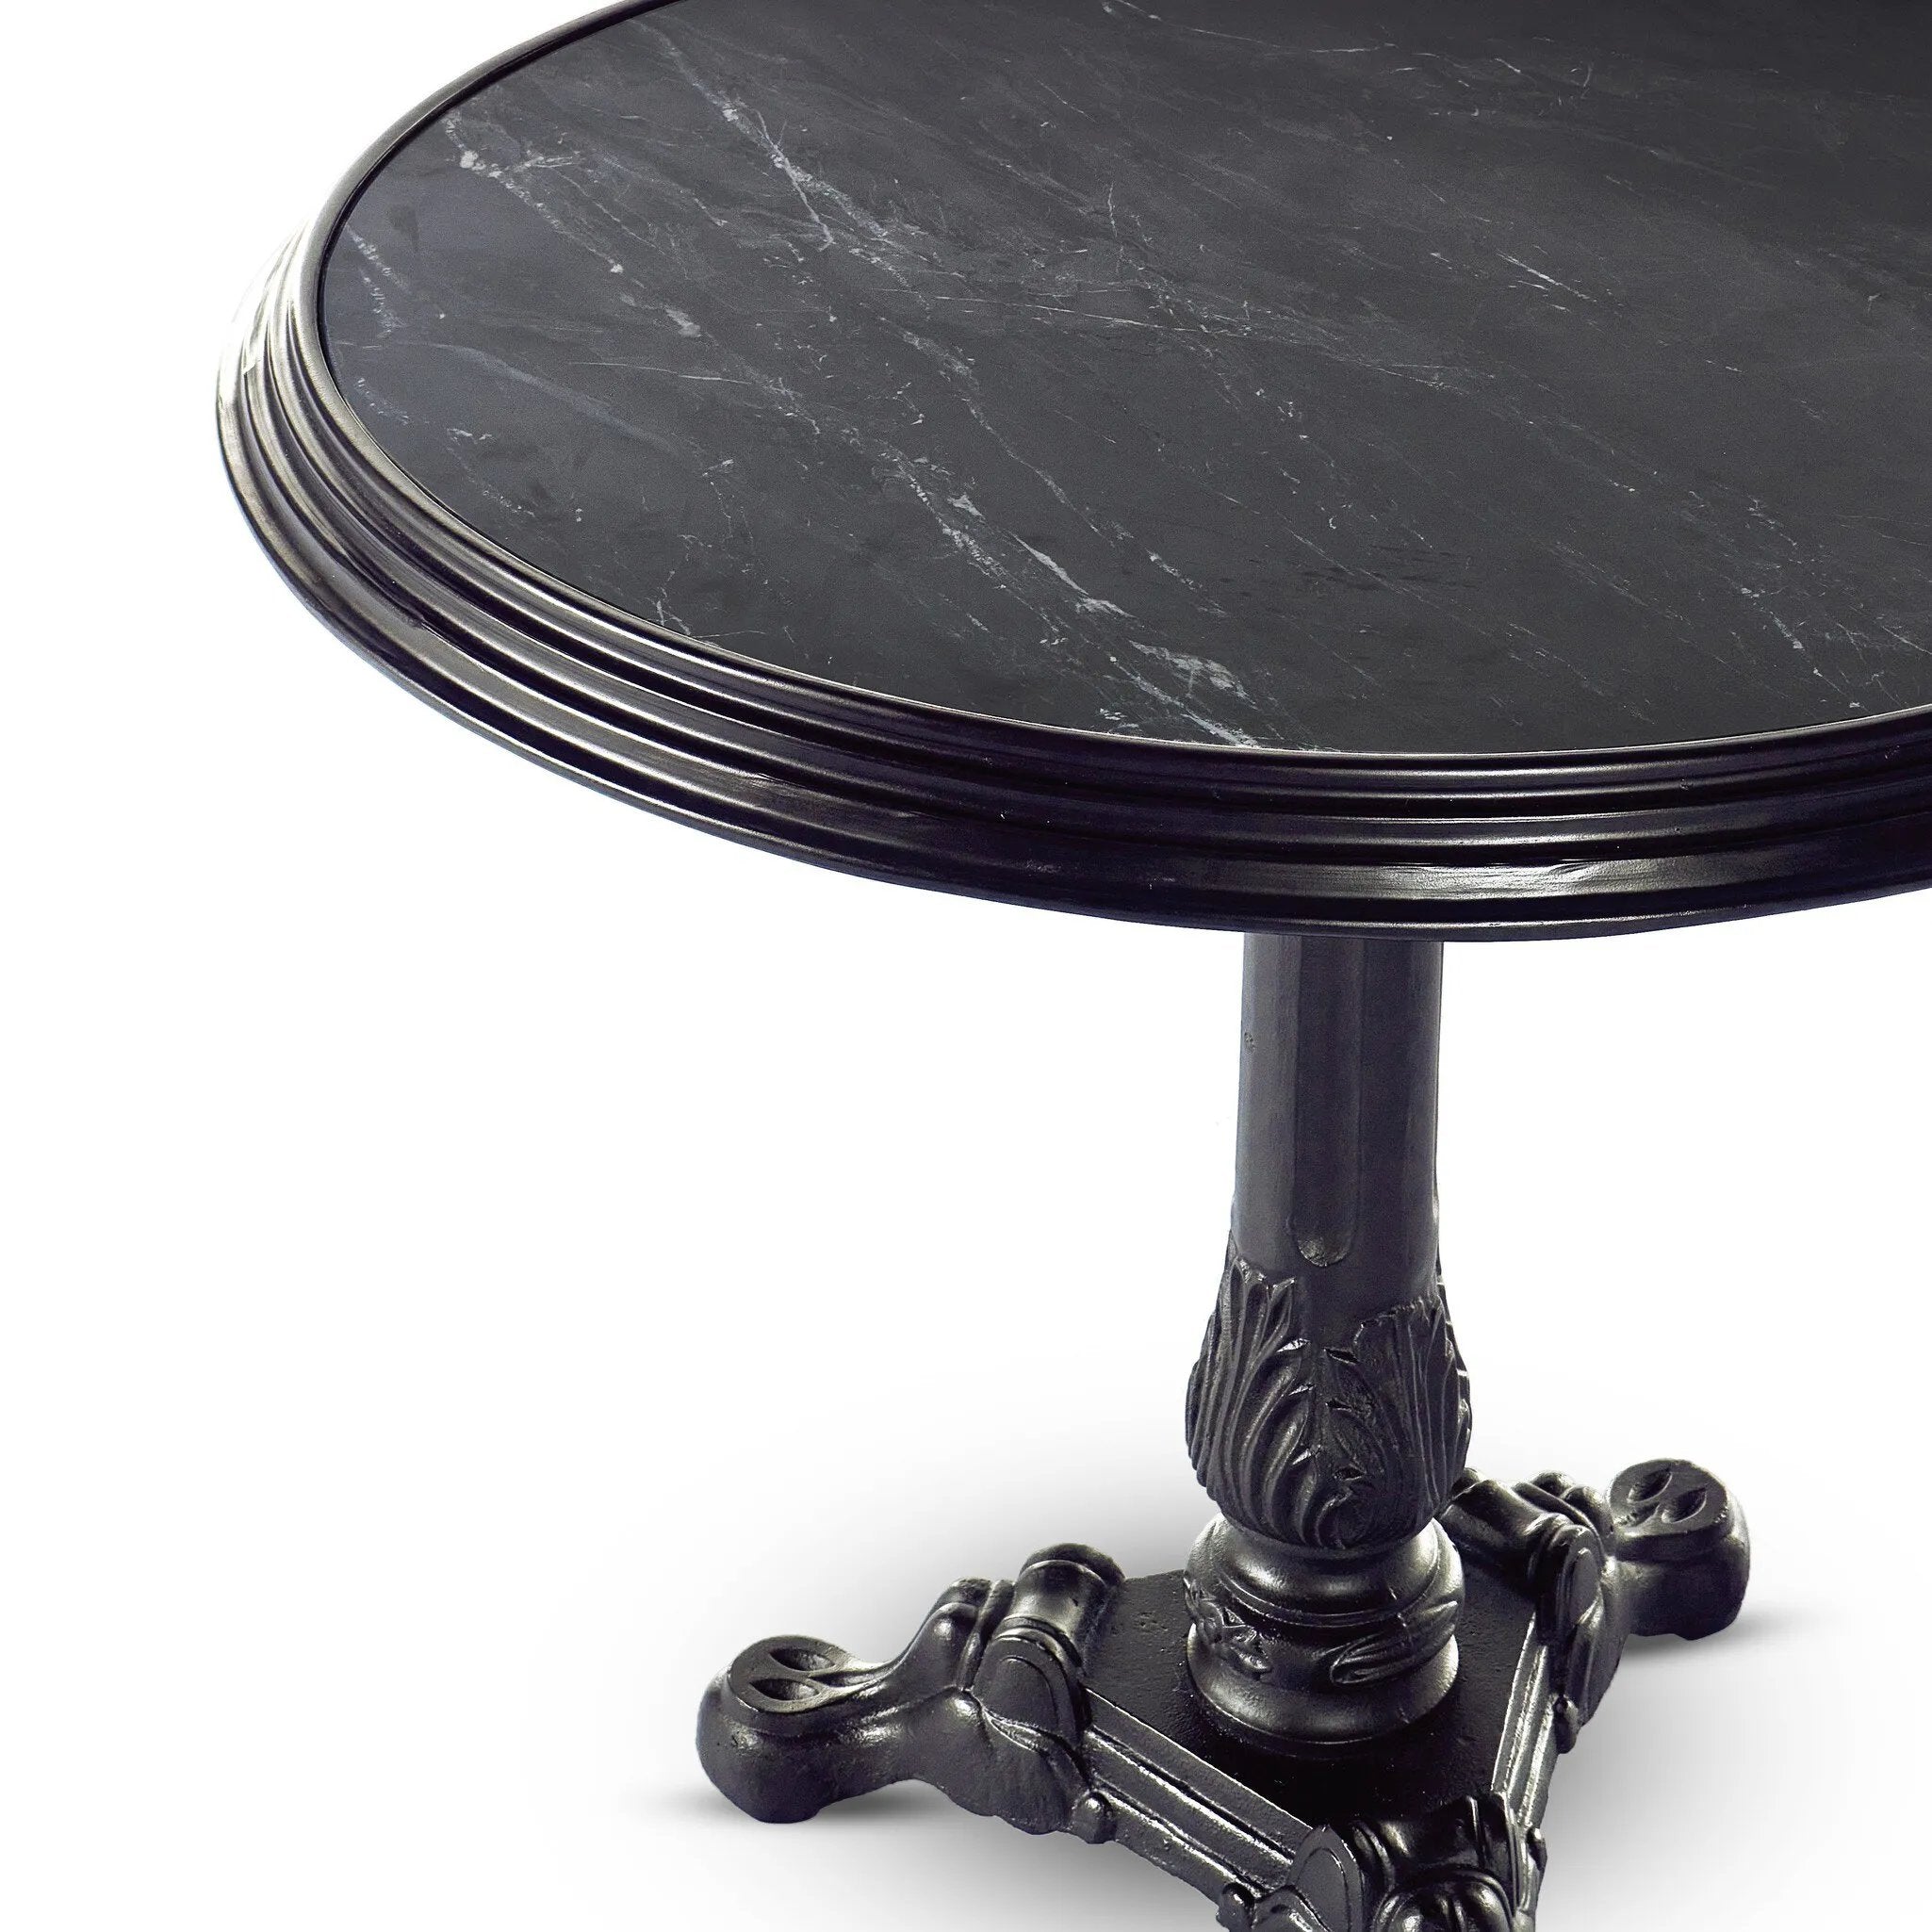 For a fresh take on classic Parisian styling, an ornate cast iron base is topped with black marble.Collection: Rockwel Amethyst Home provides interior design, new home construction design consulting, vintage area rugs, and lighting in the Omaha metro area.